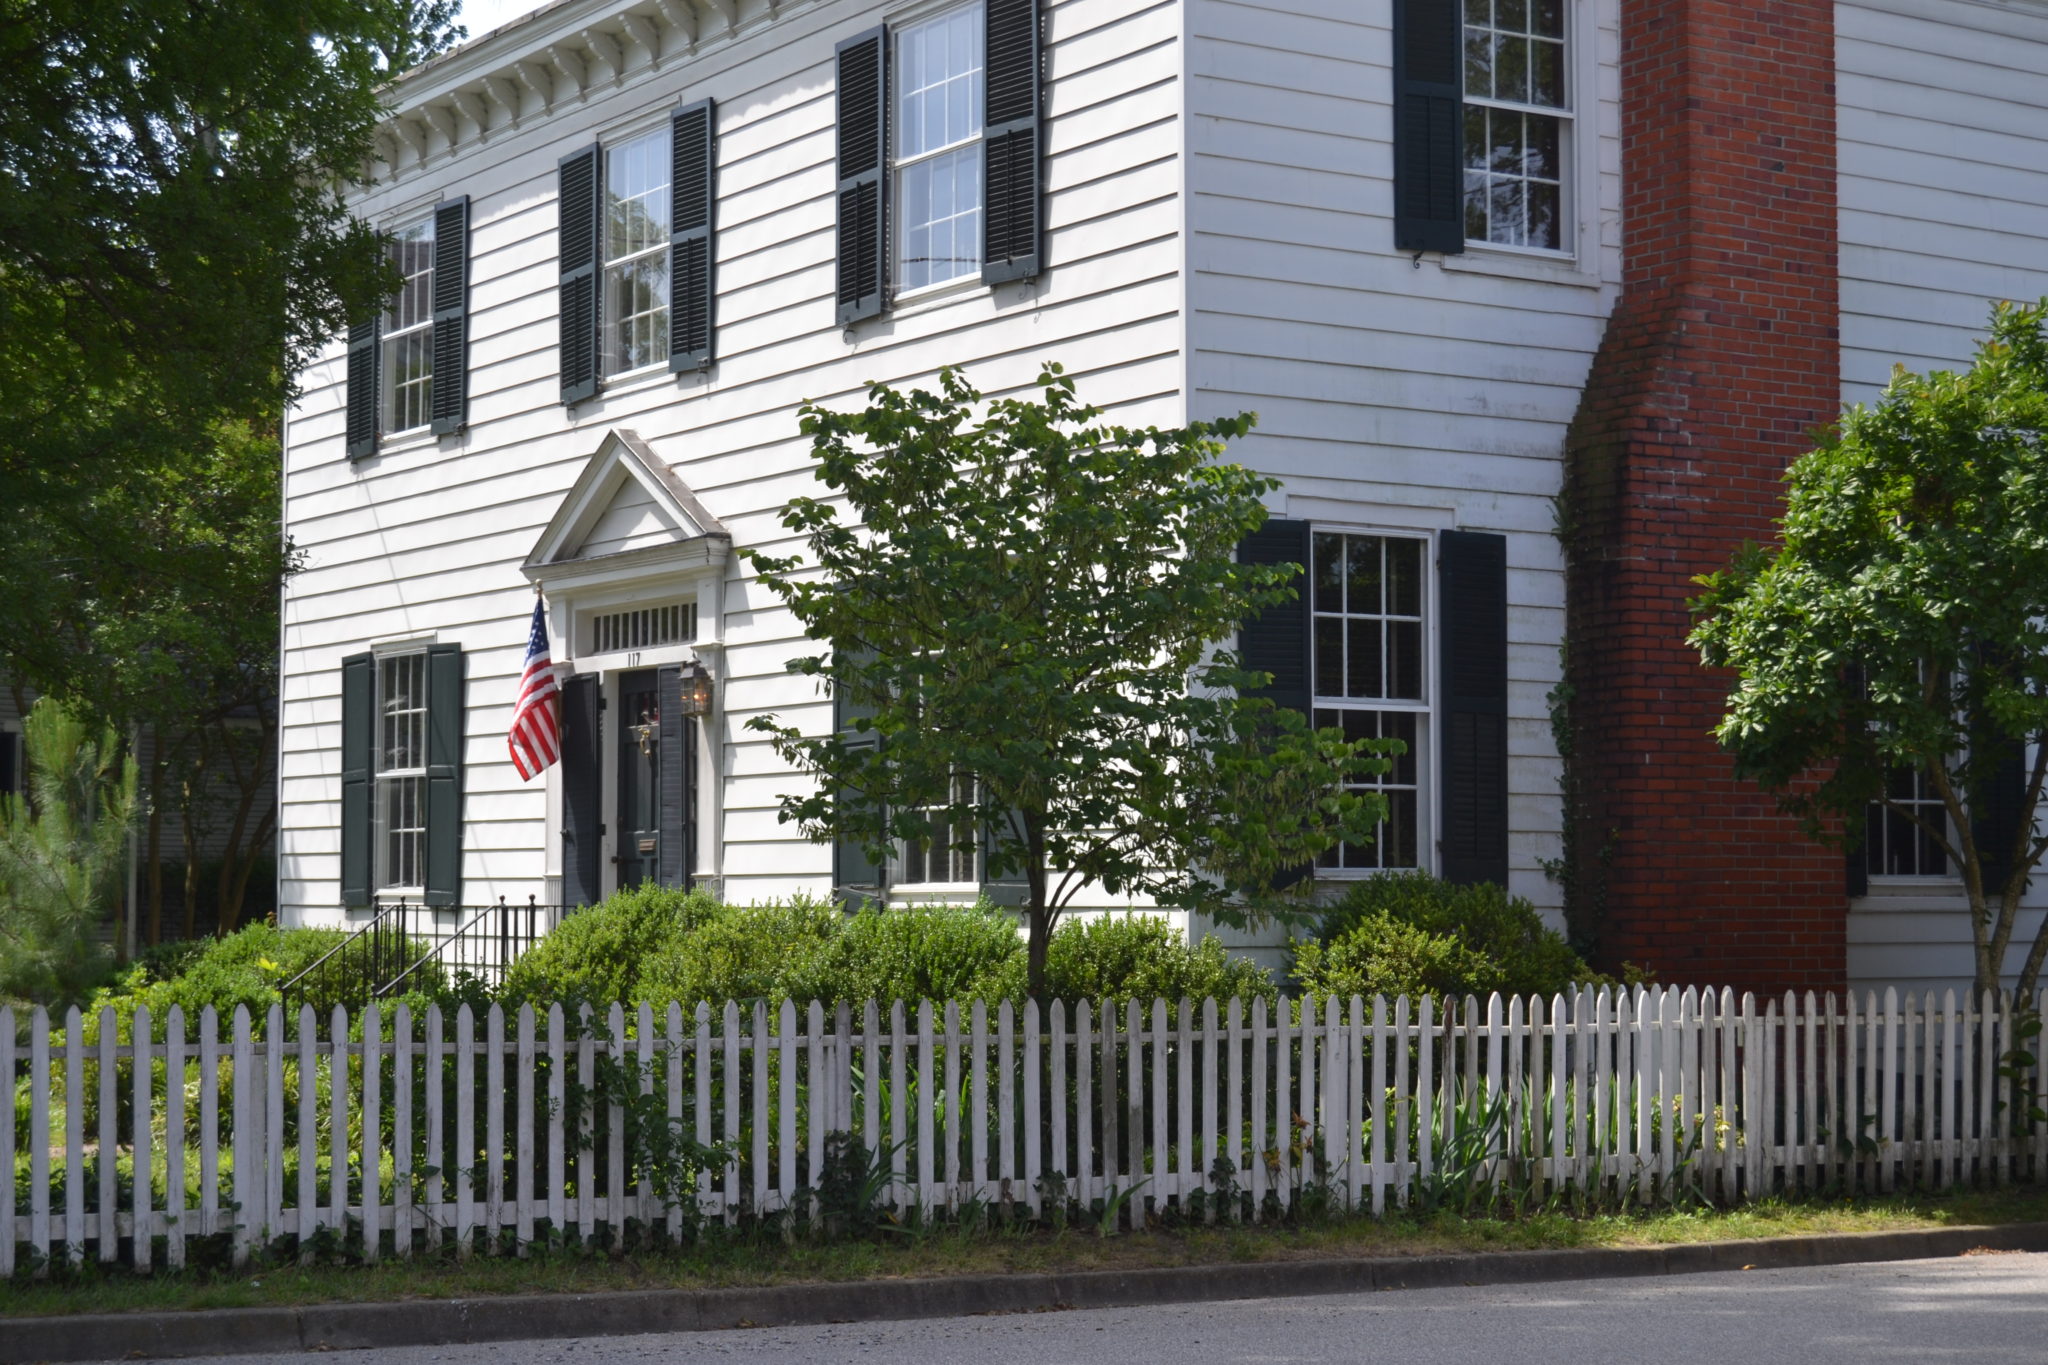 White-picket-fence-with-a-traditonal-appeal-